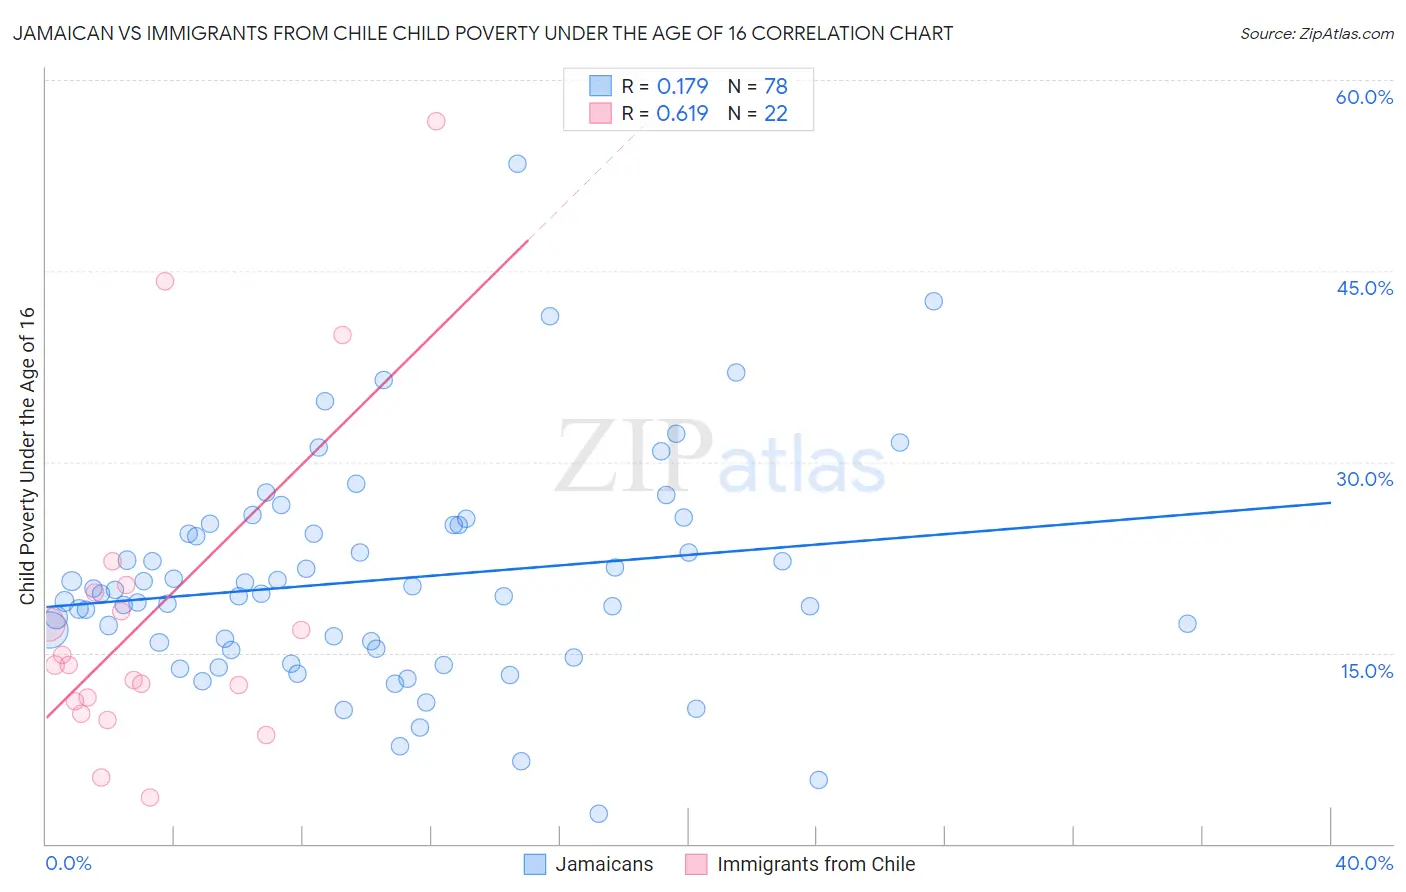 Jamaican vs Immigrants from Chile Child Poverty Under the Age of 16